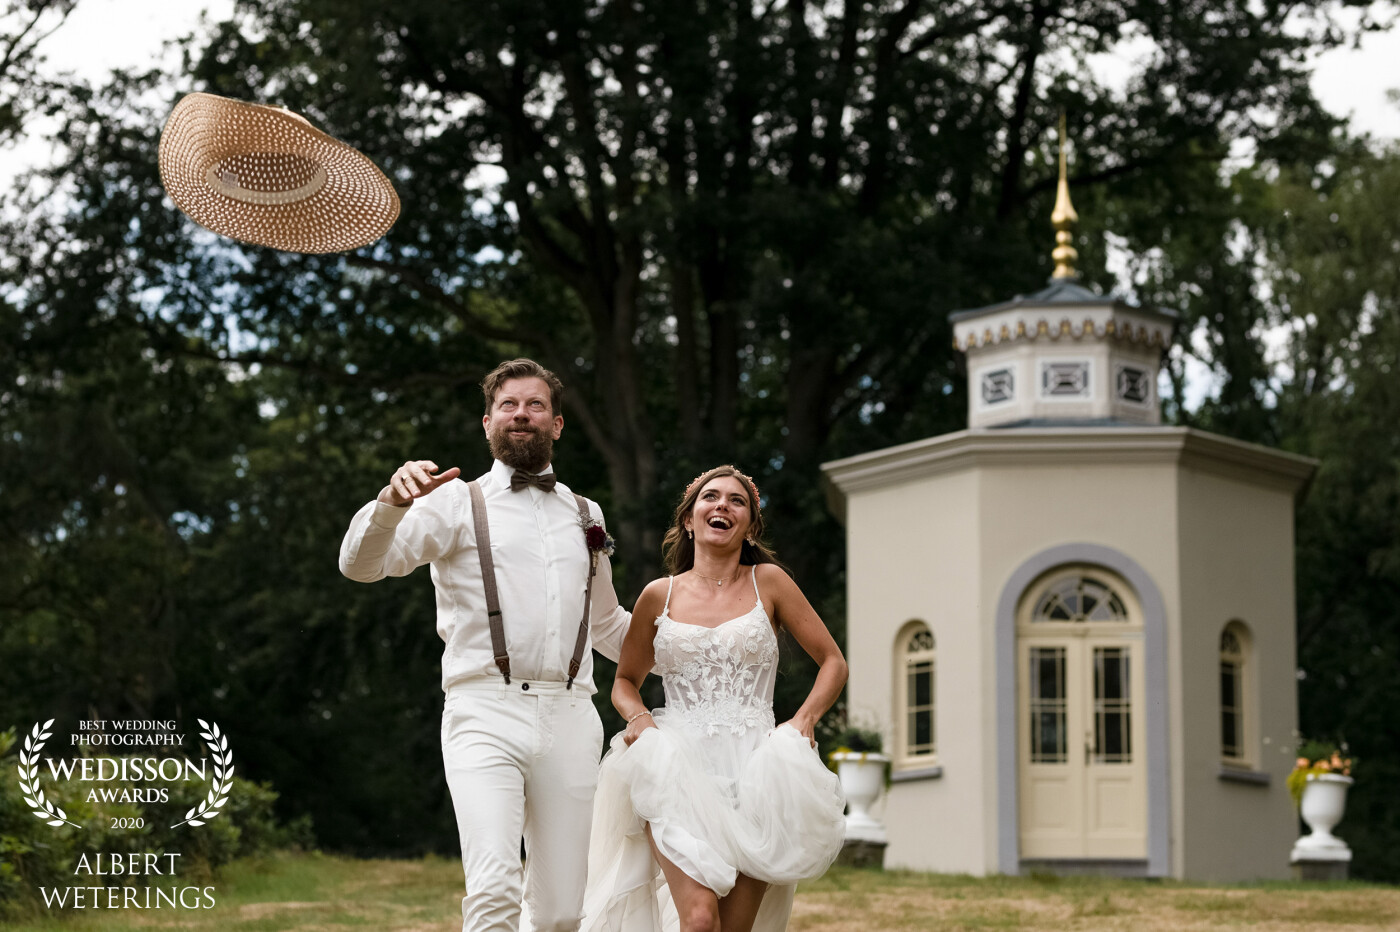 Getting married is a fun day, so let's show it to everyone! And they did, all day long. Dutch girl and groom from New Zealand, perfect match and a day full of love and lots of champagne.